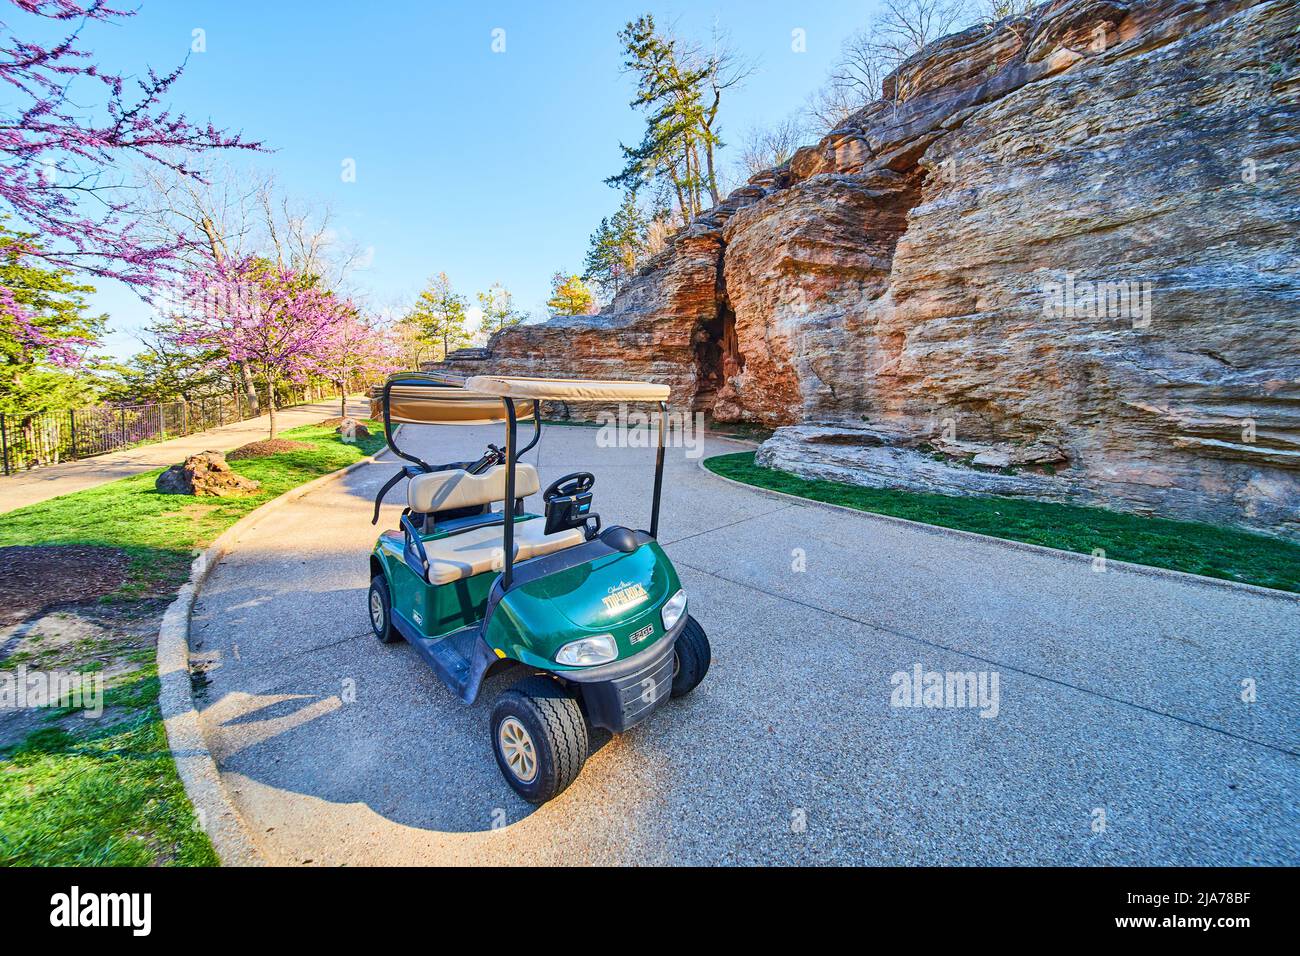 Golf cart on stunning paved path in spring next to cliffs Stock Photo